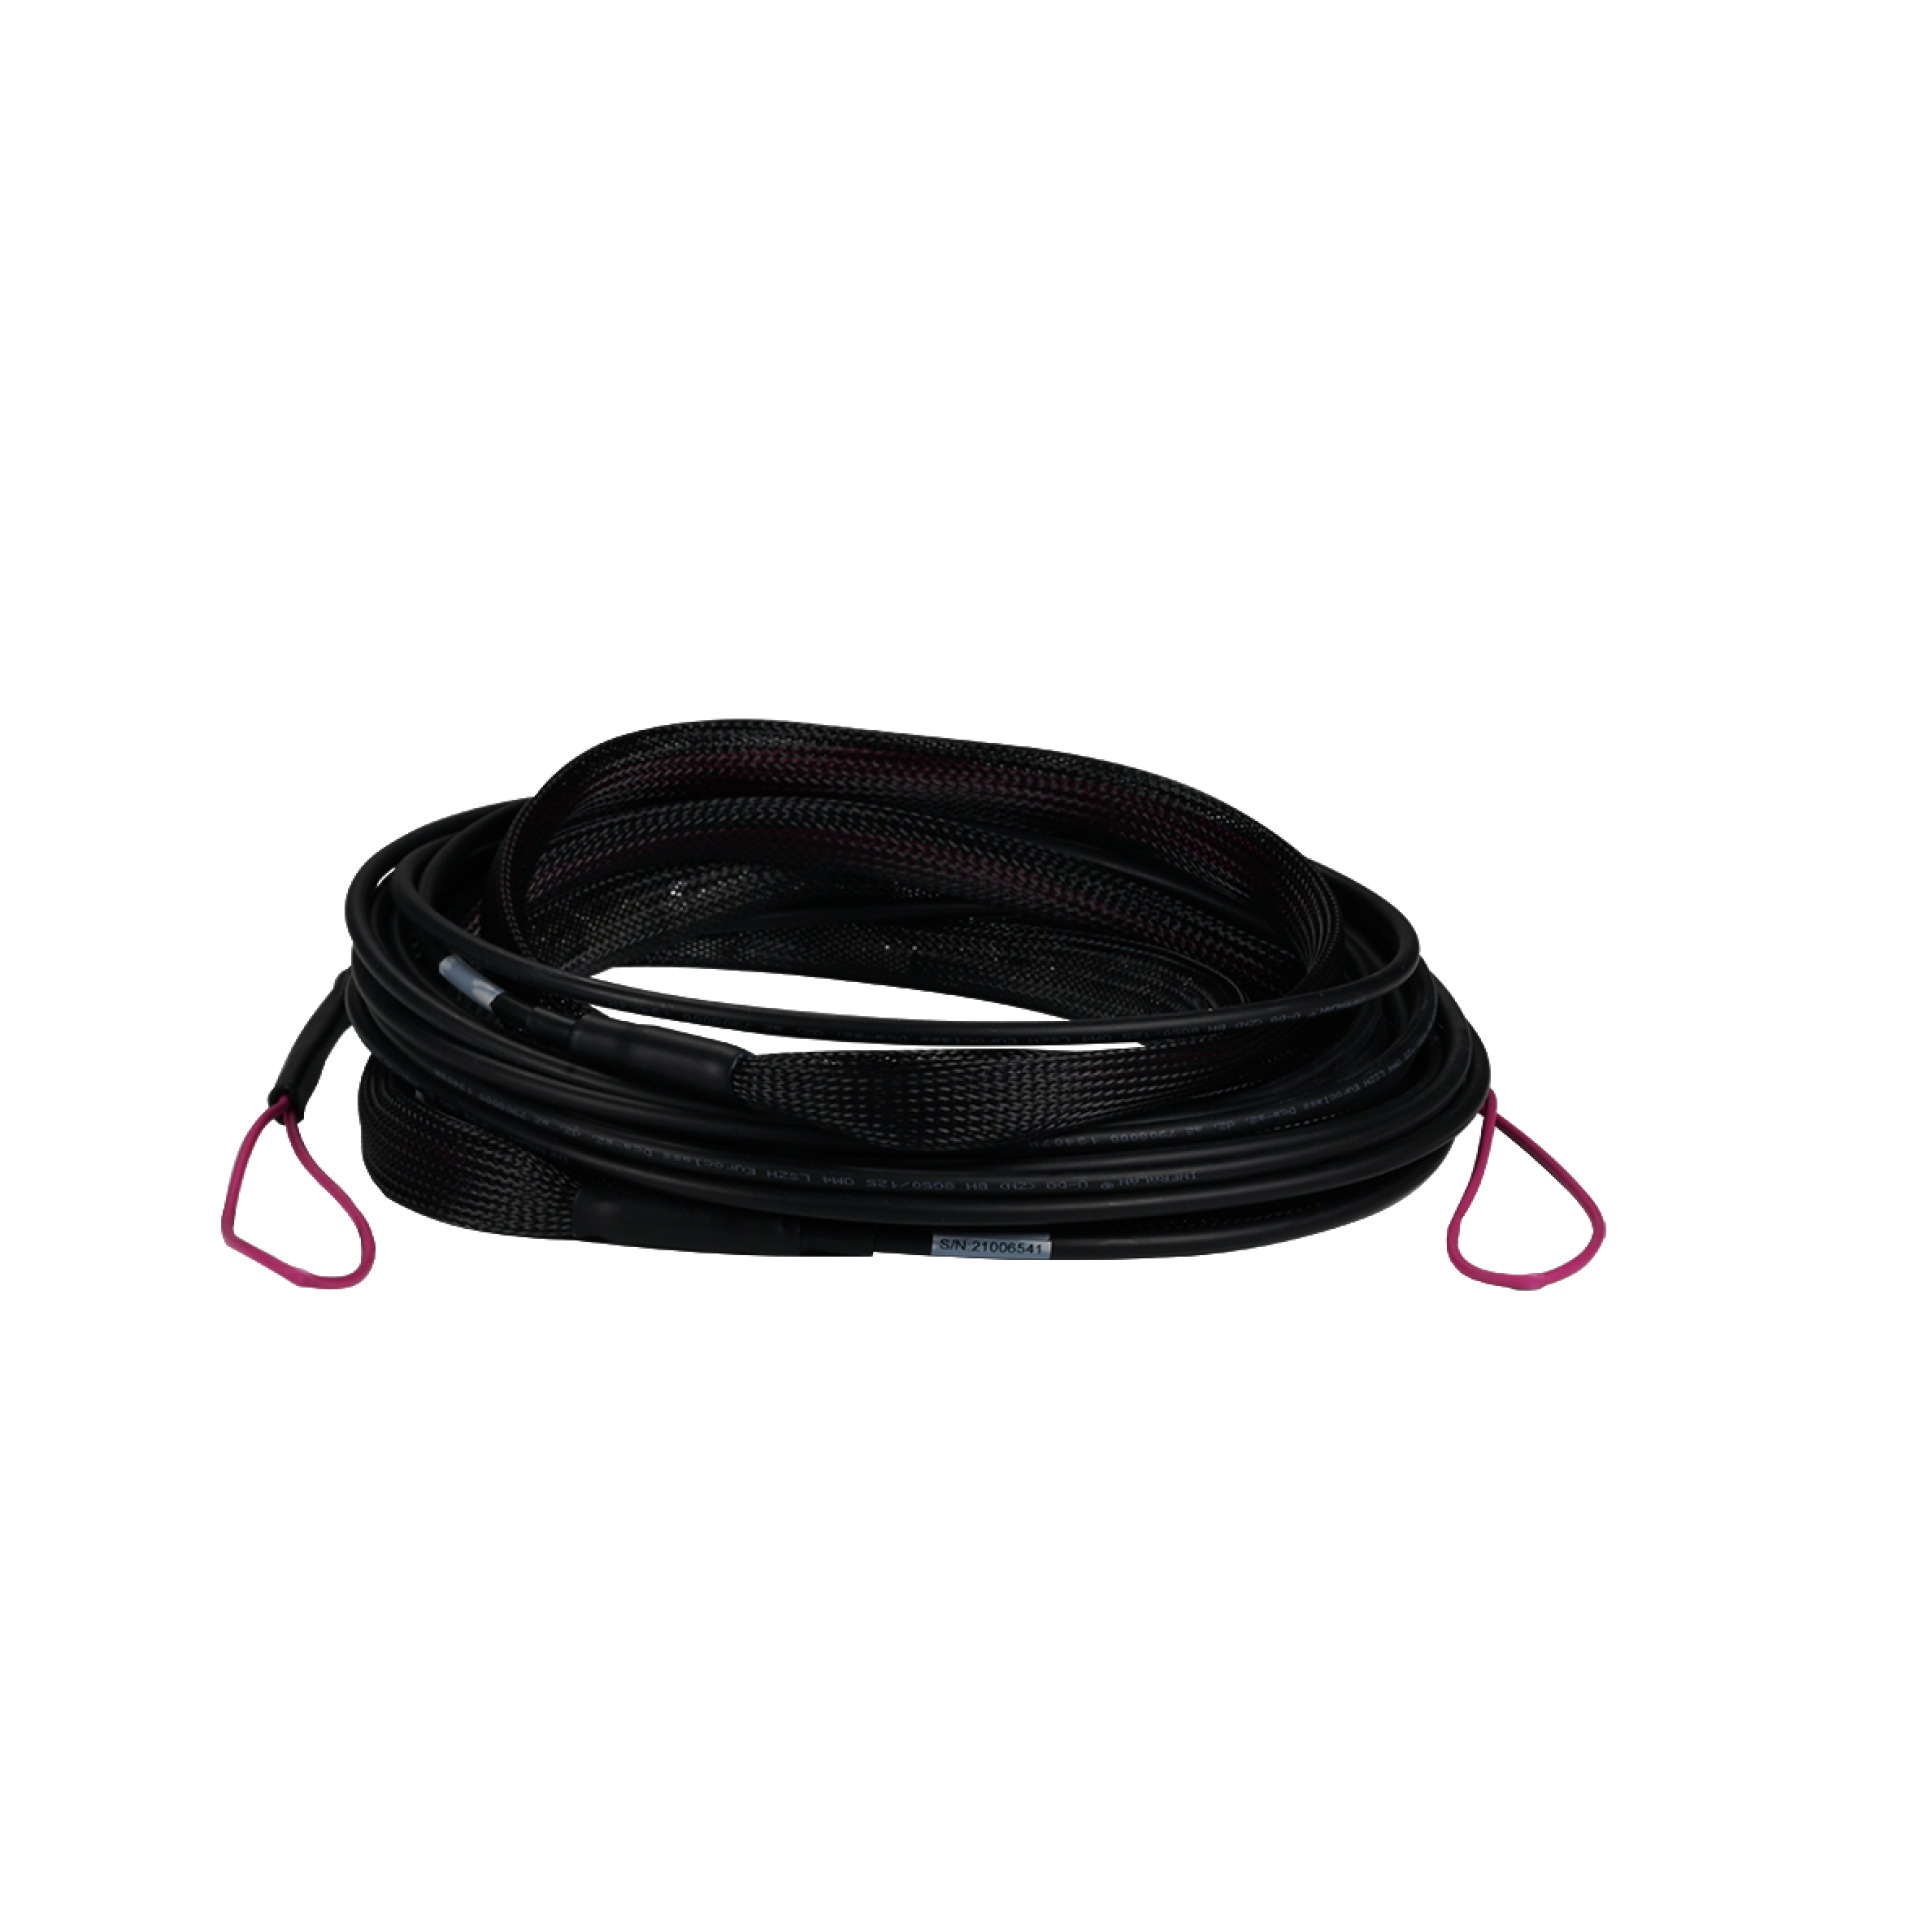 Trunk cable U-DQ(ZN)BH 4G 50/125, SC/SC OM4 200m